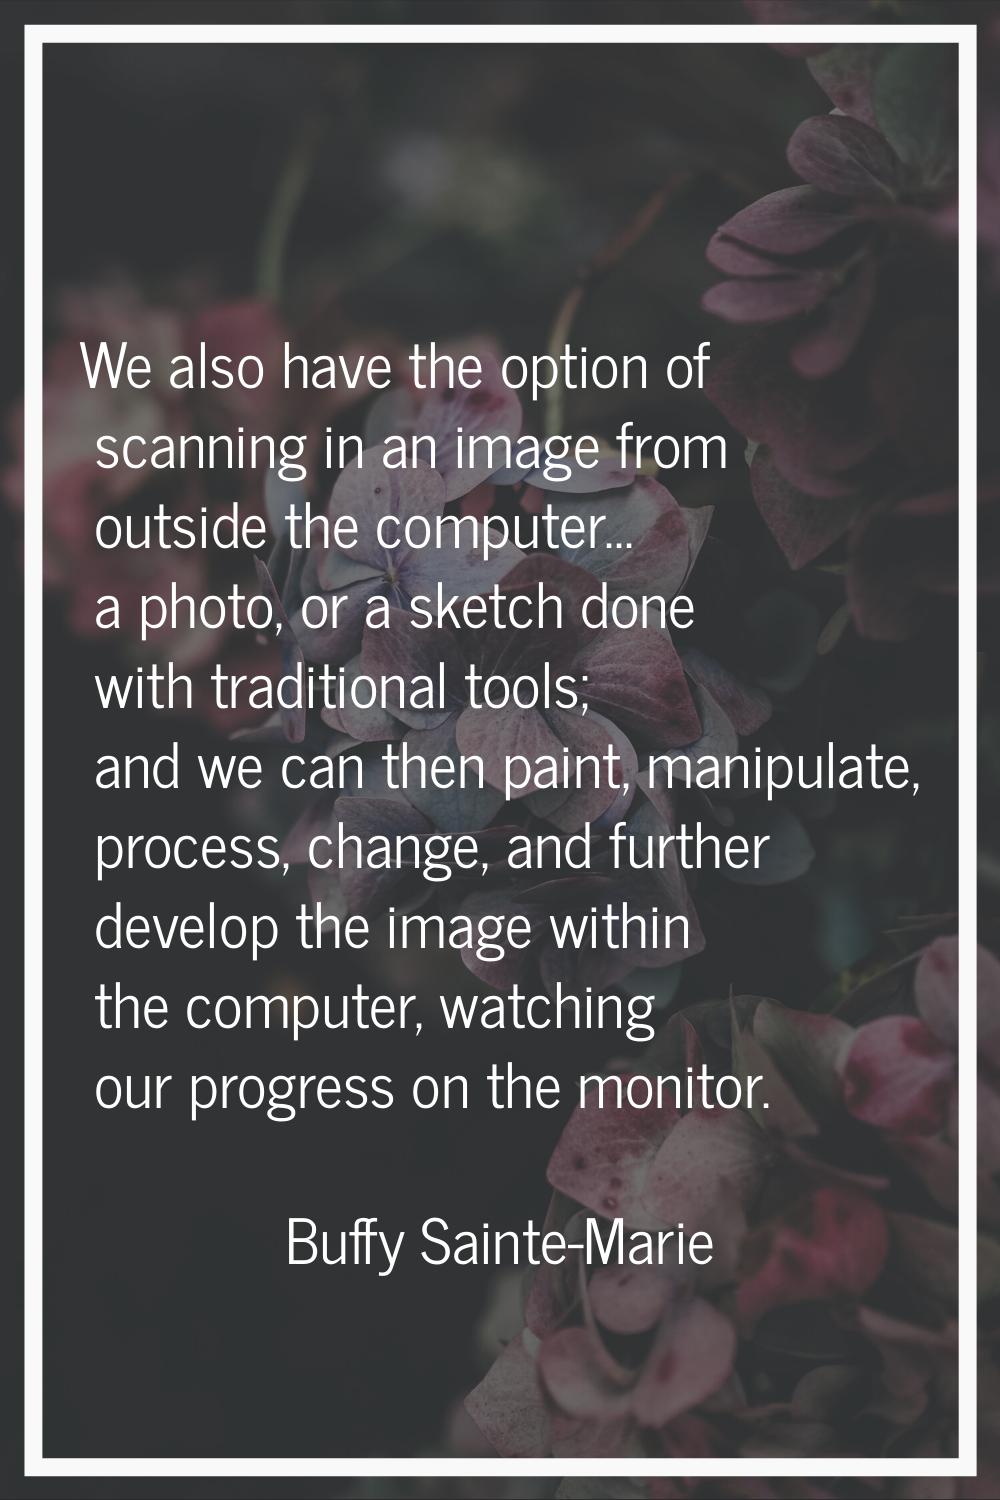 We also have the option of scanning in an image from outside the computer... a photo, or a sketch d